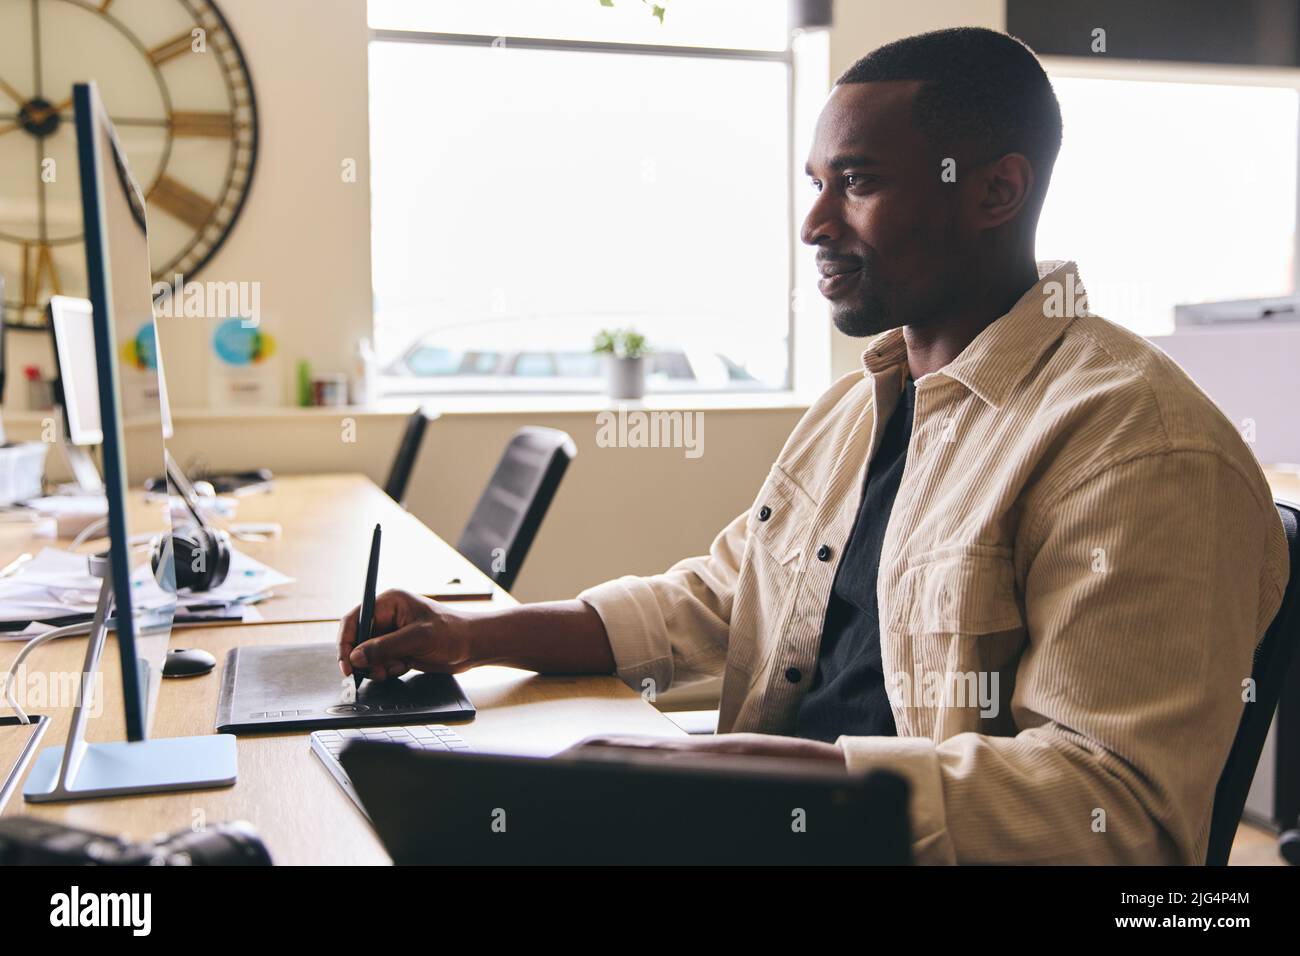 Young Black Male Advertising Marketing Or Design Creative In Modern Office Sitting At Desk Working On Computer Stock Photo